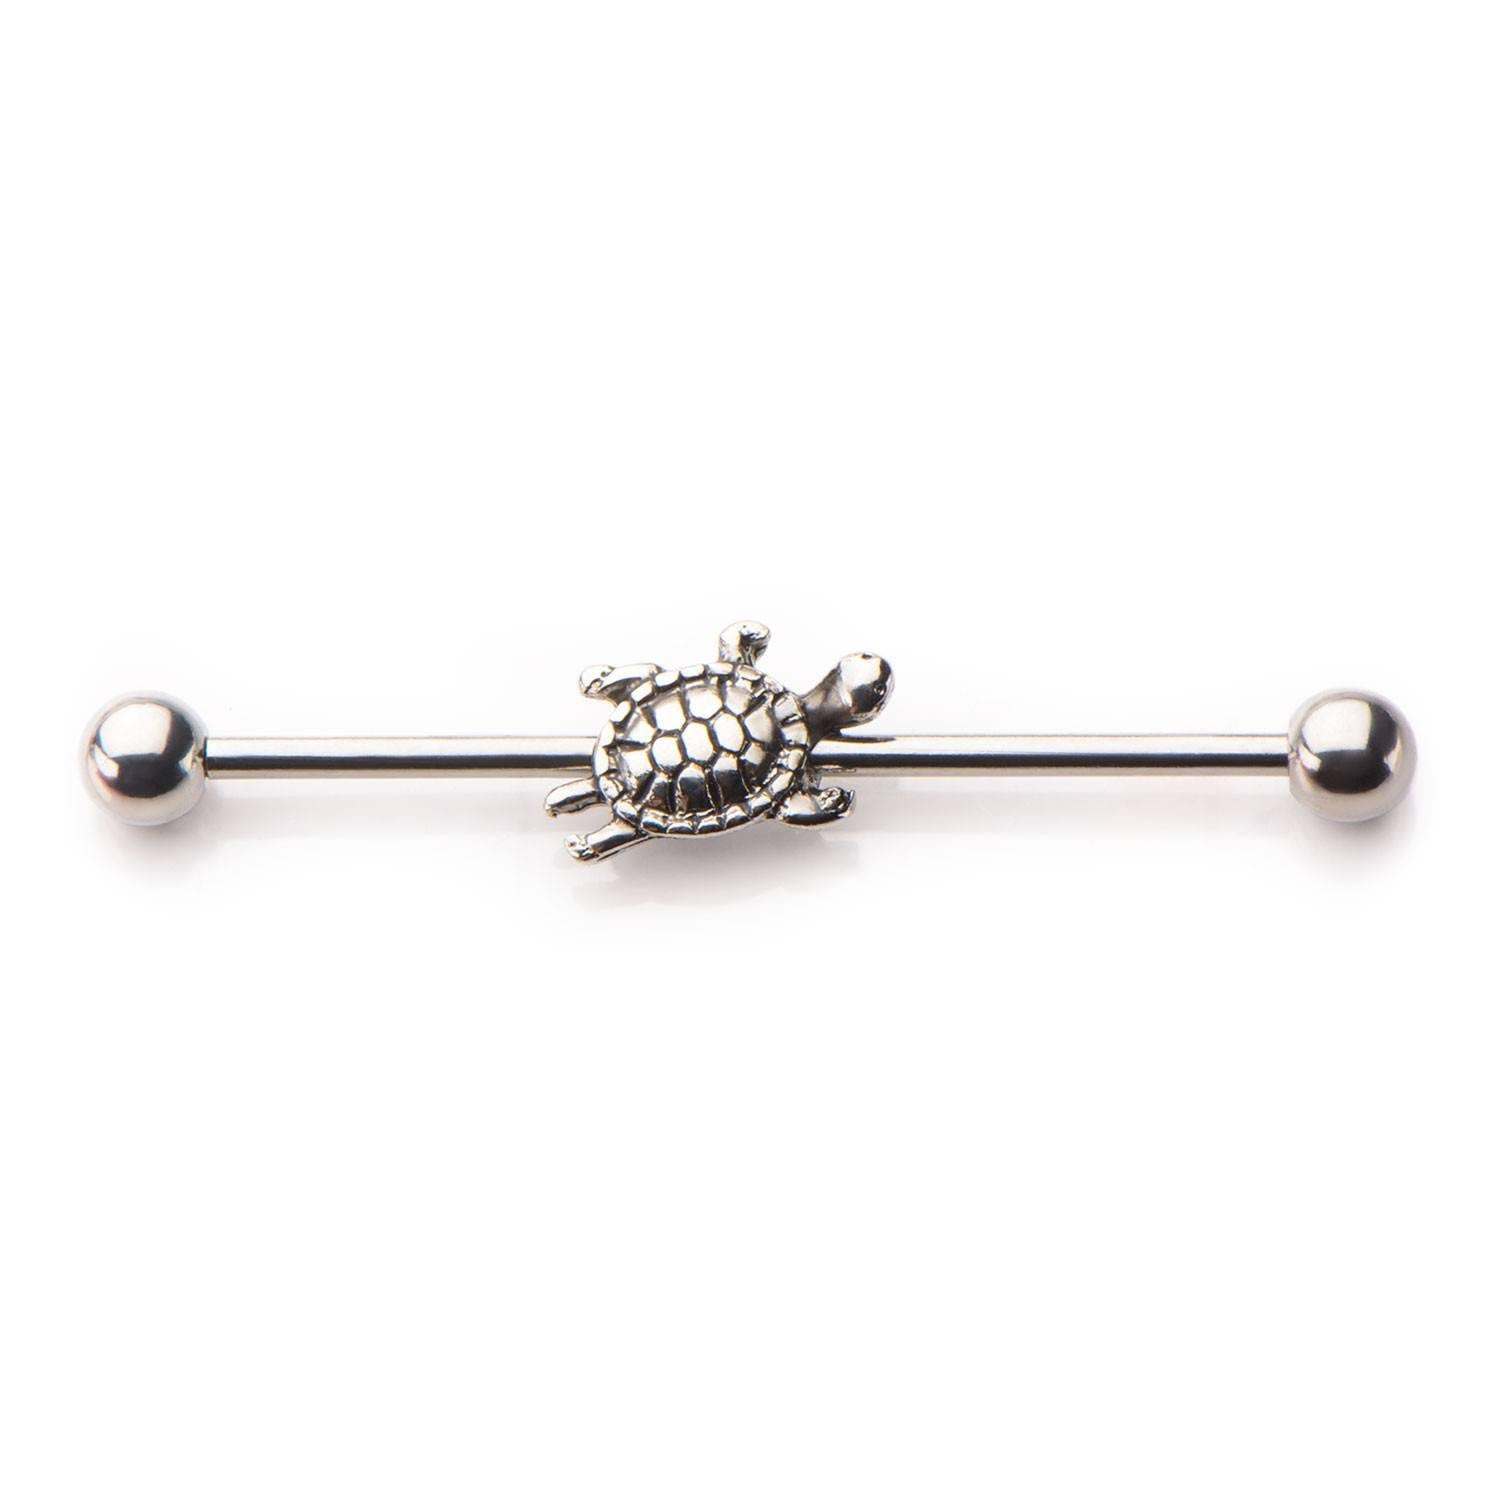 14g Turtle Industrial Barbell Industrials 14g - 1-3/8" long (35mm) Stainless Steel